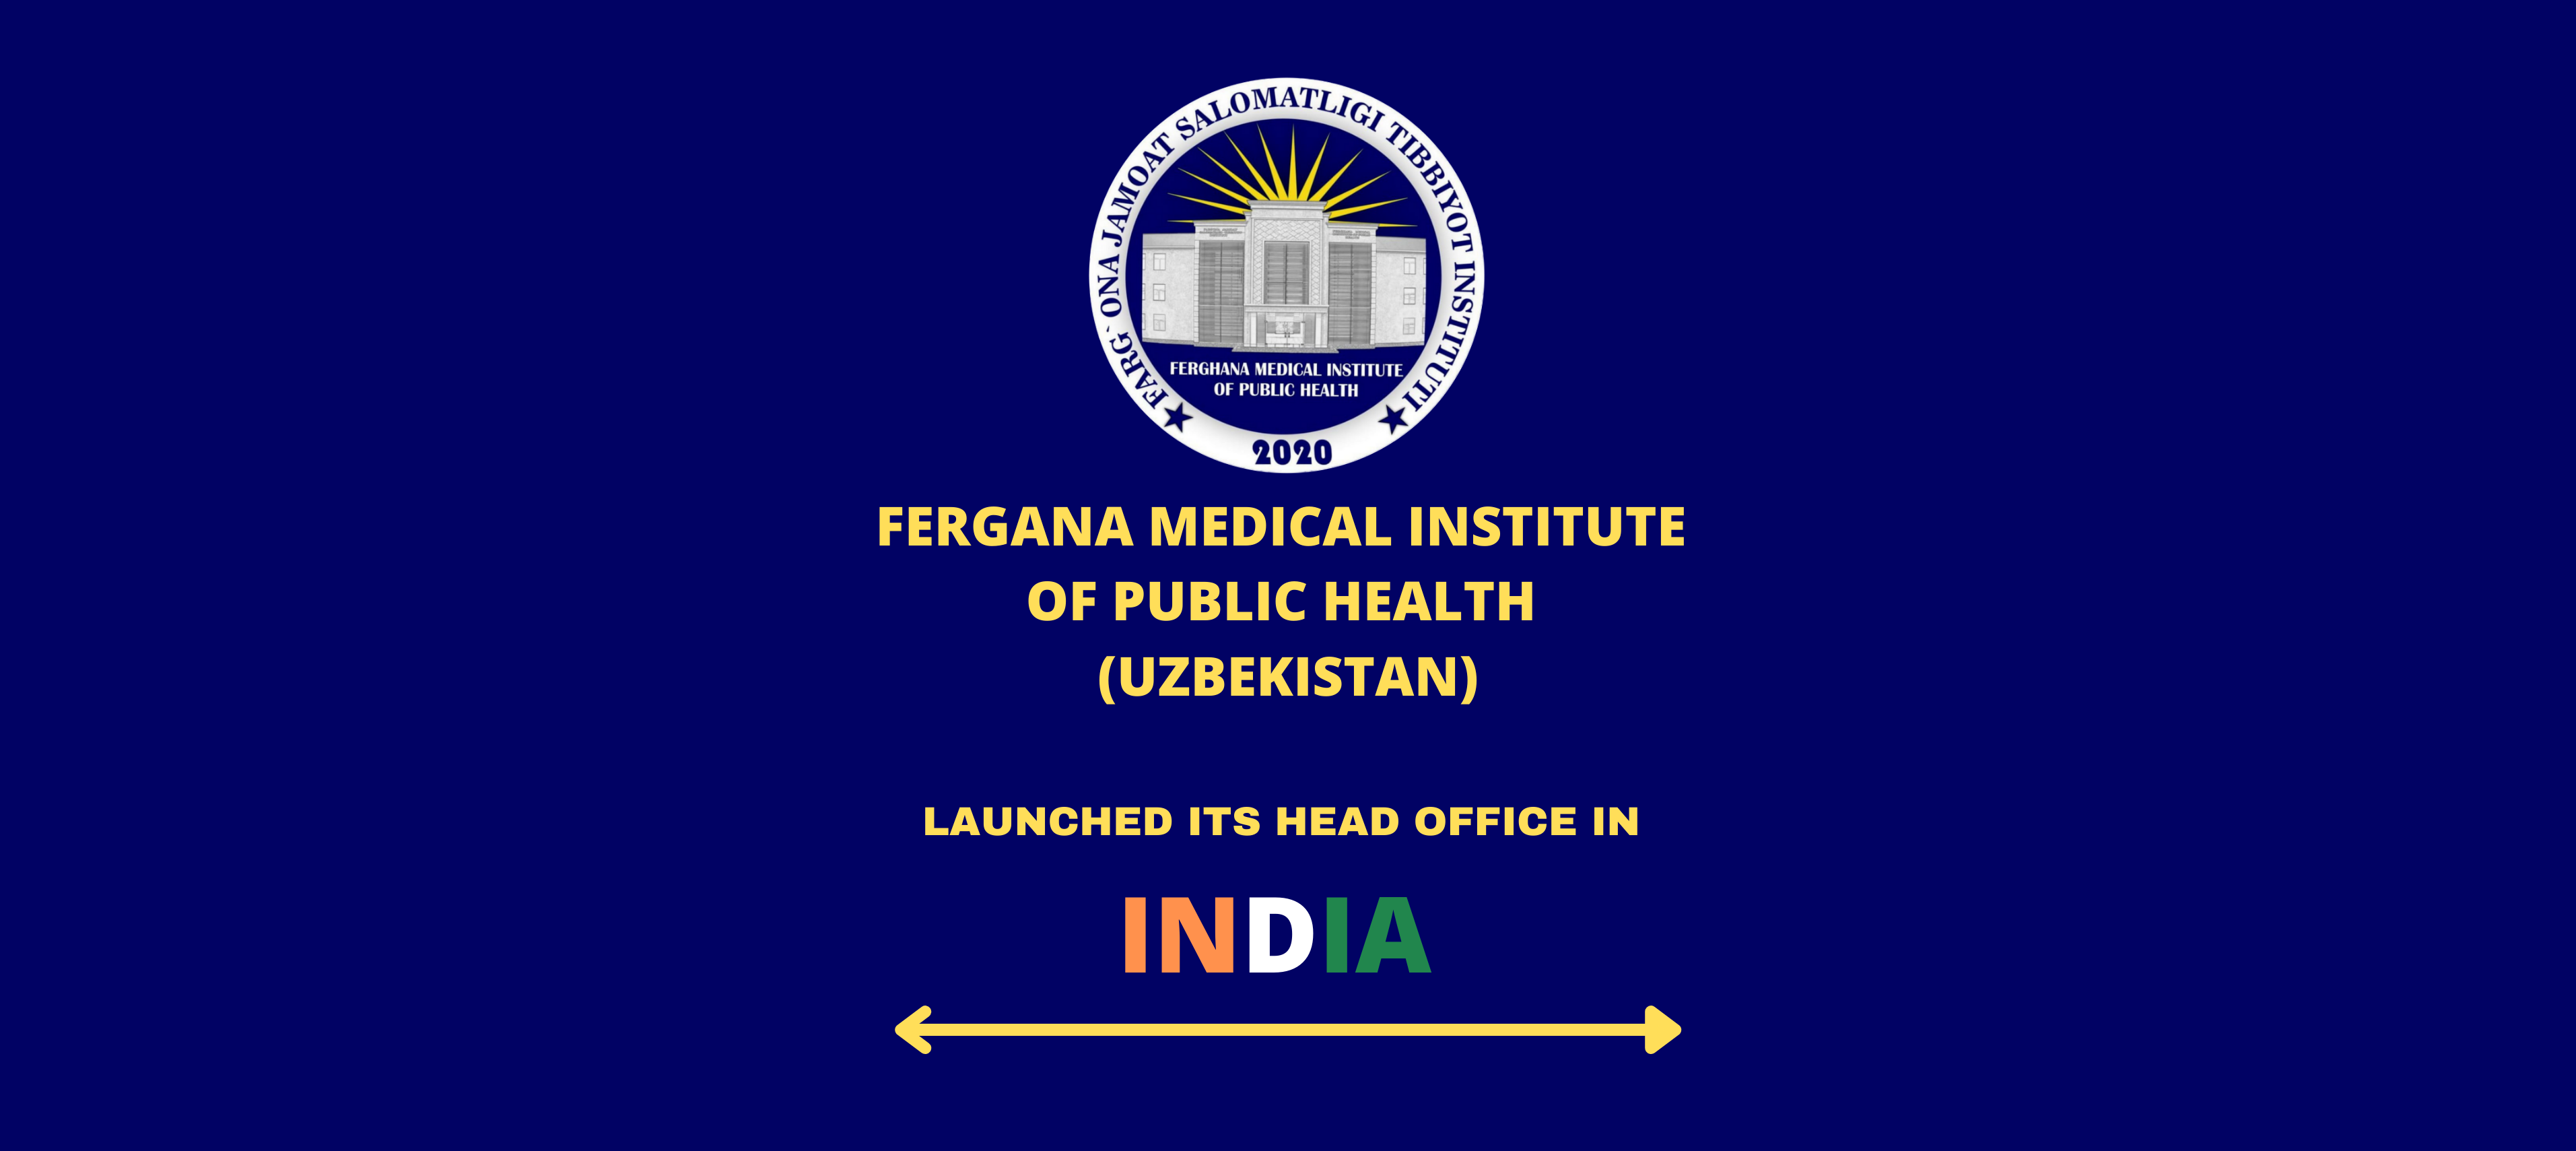 Fergana Medical Institute of Public Health launched its head office in India